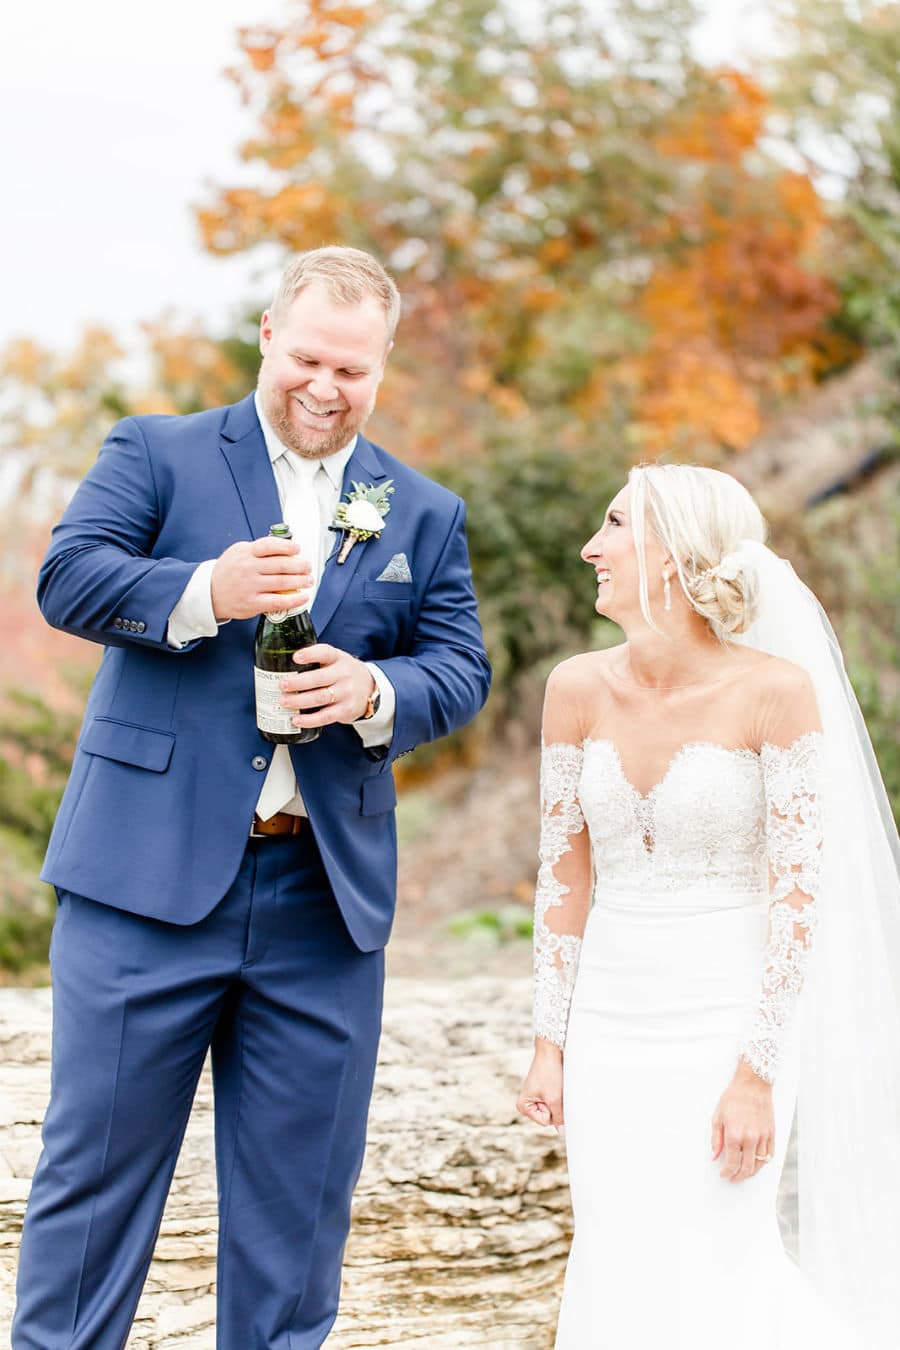 Bride and groom outdoors with bottle of champagne